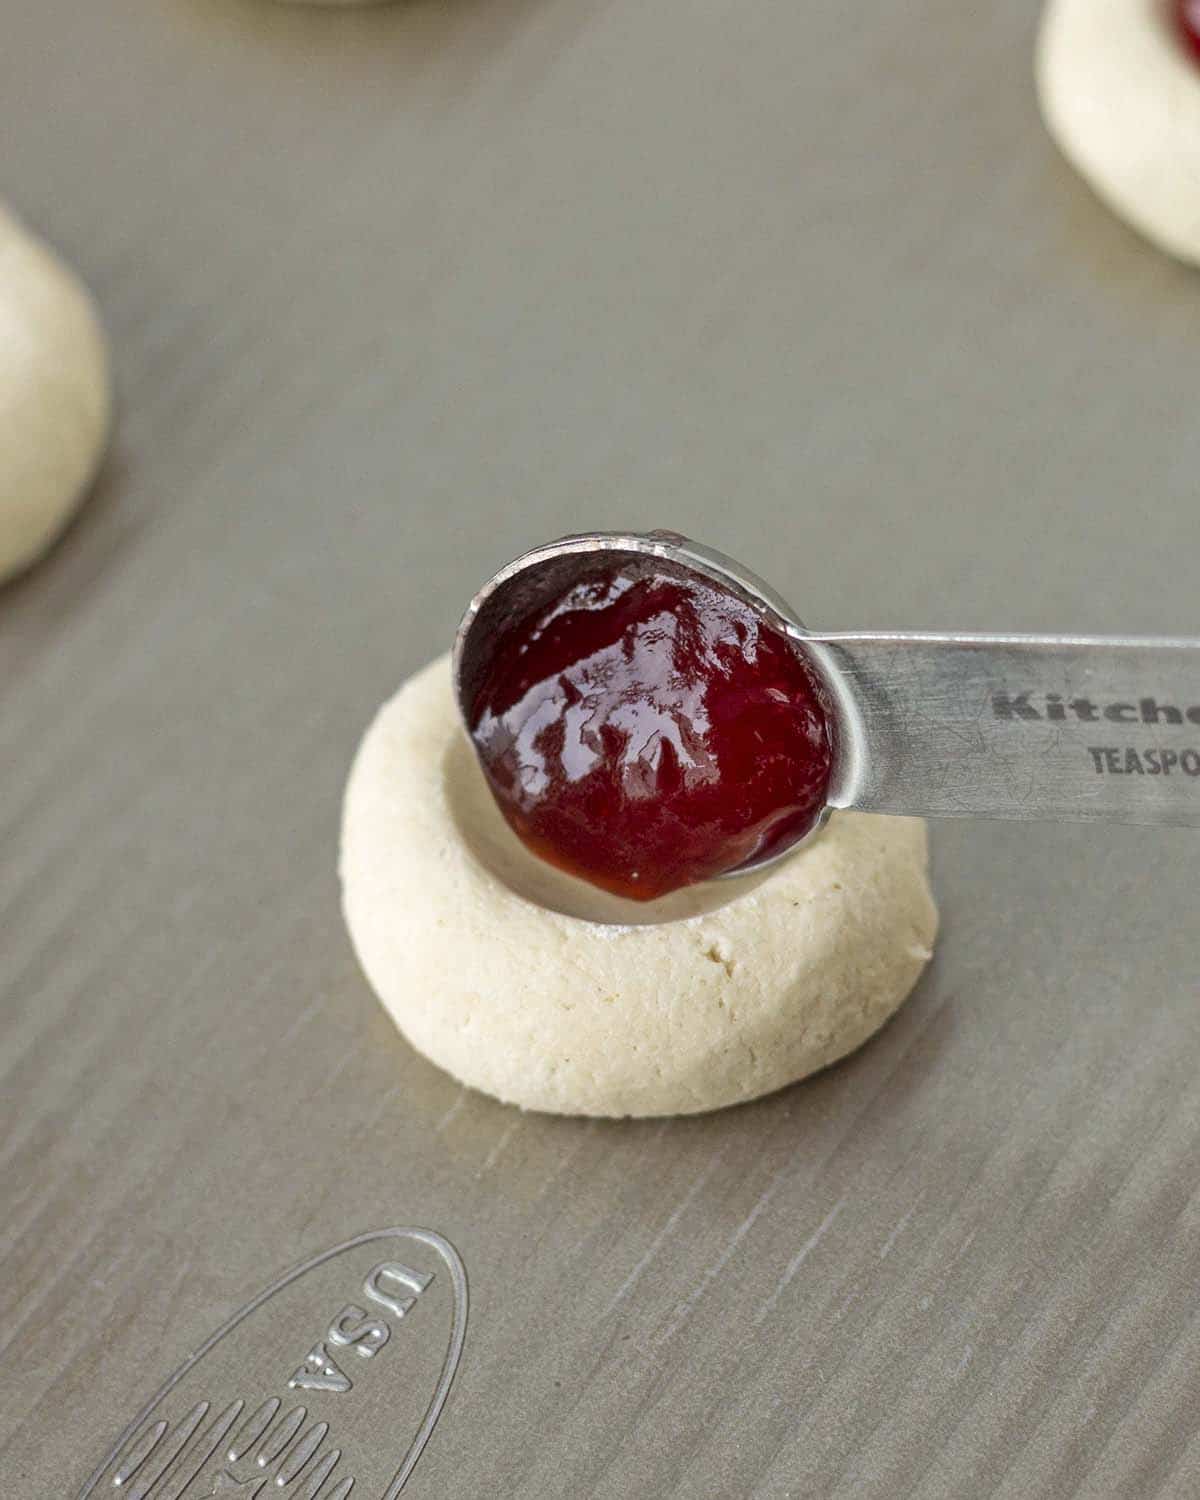 A measuring spoon putting raspberry jam into a thumbprint cookie before it bakes.